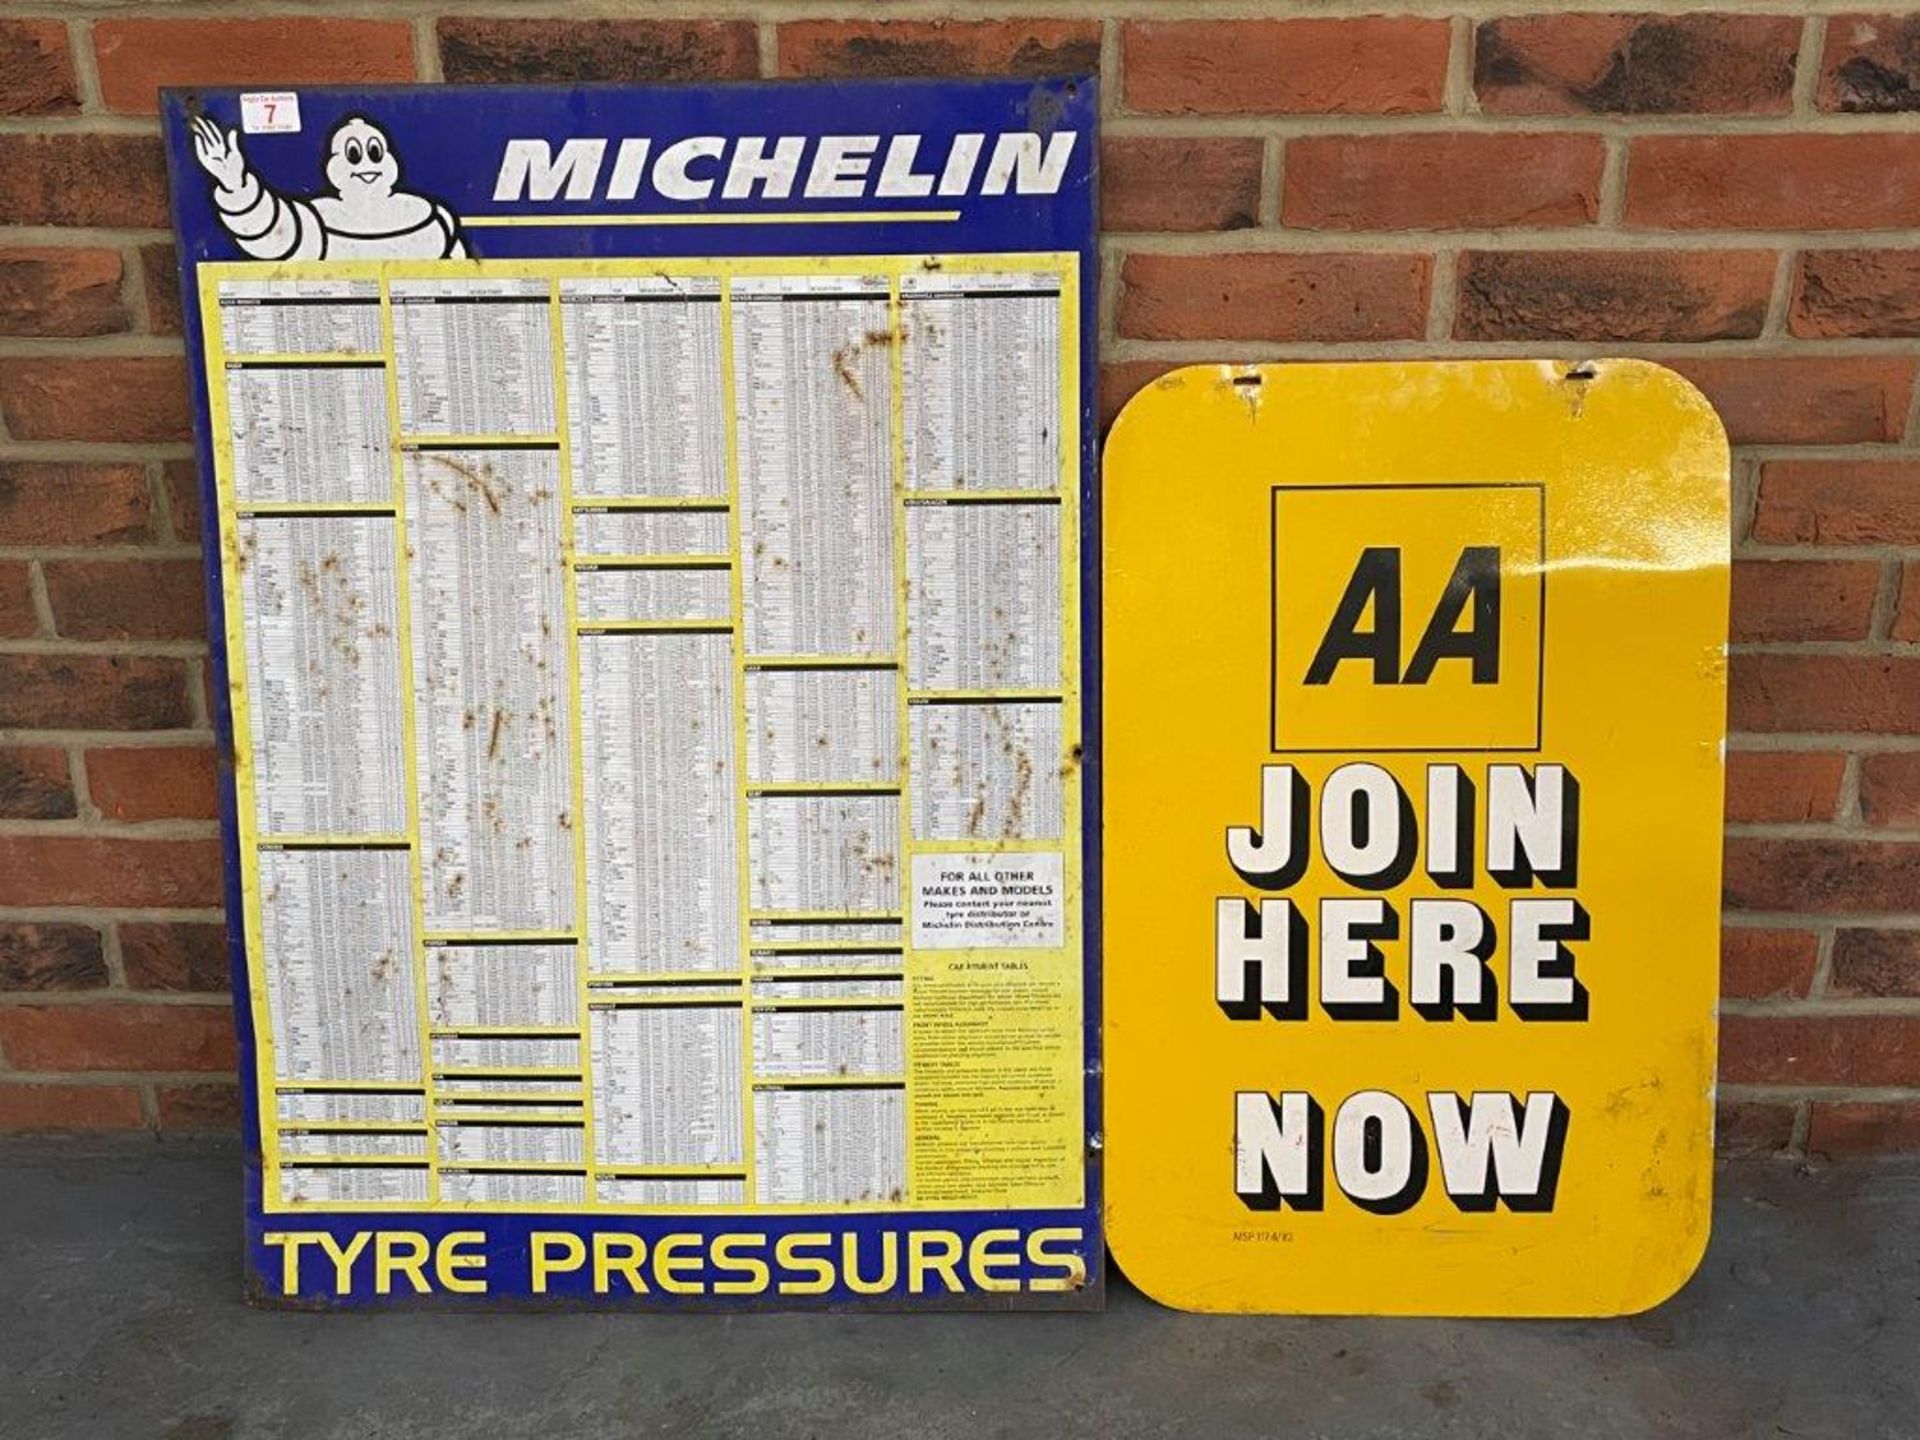 Michelin Tin Tyre Pressure Chart Together With A Double sided AA Join Here Now Metal Sign